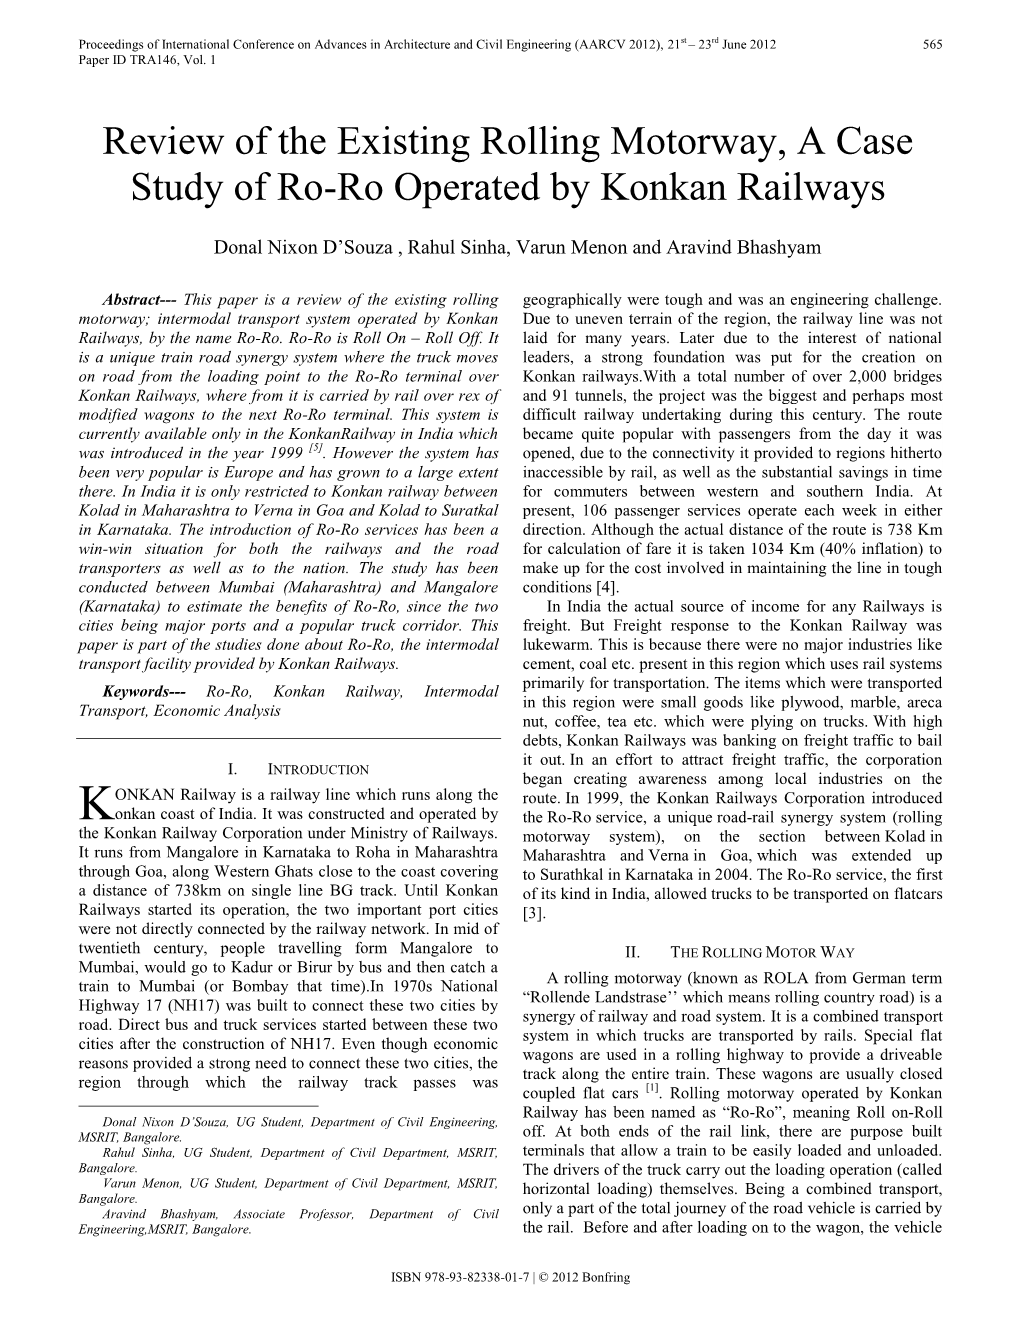 Review of the Existing Rolling Motorway, a Case Study of Ro-Ro Operated by Konkan Railways